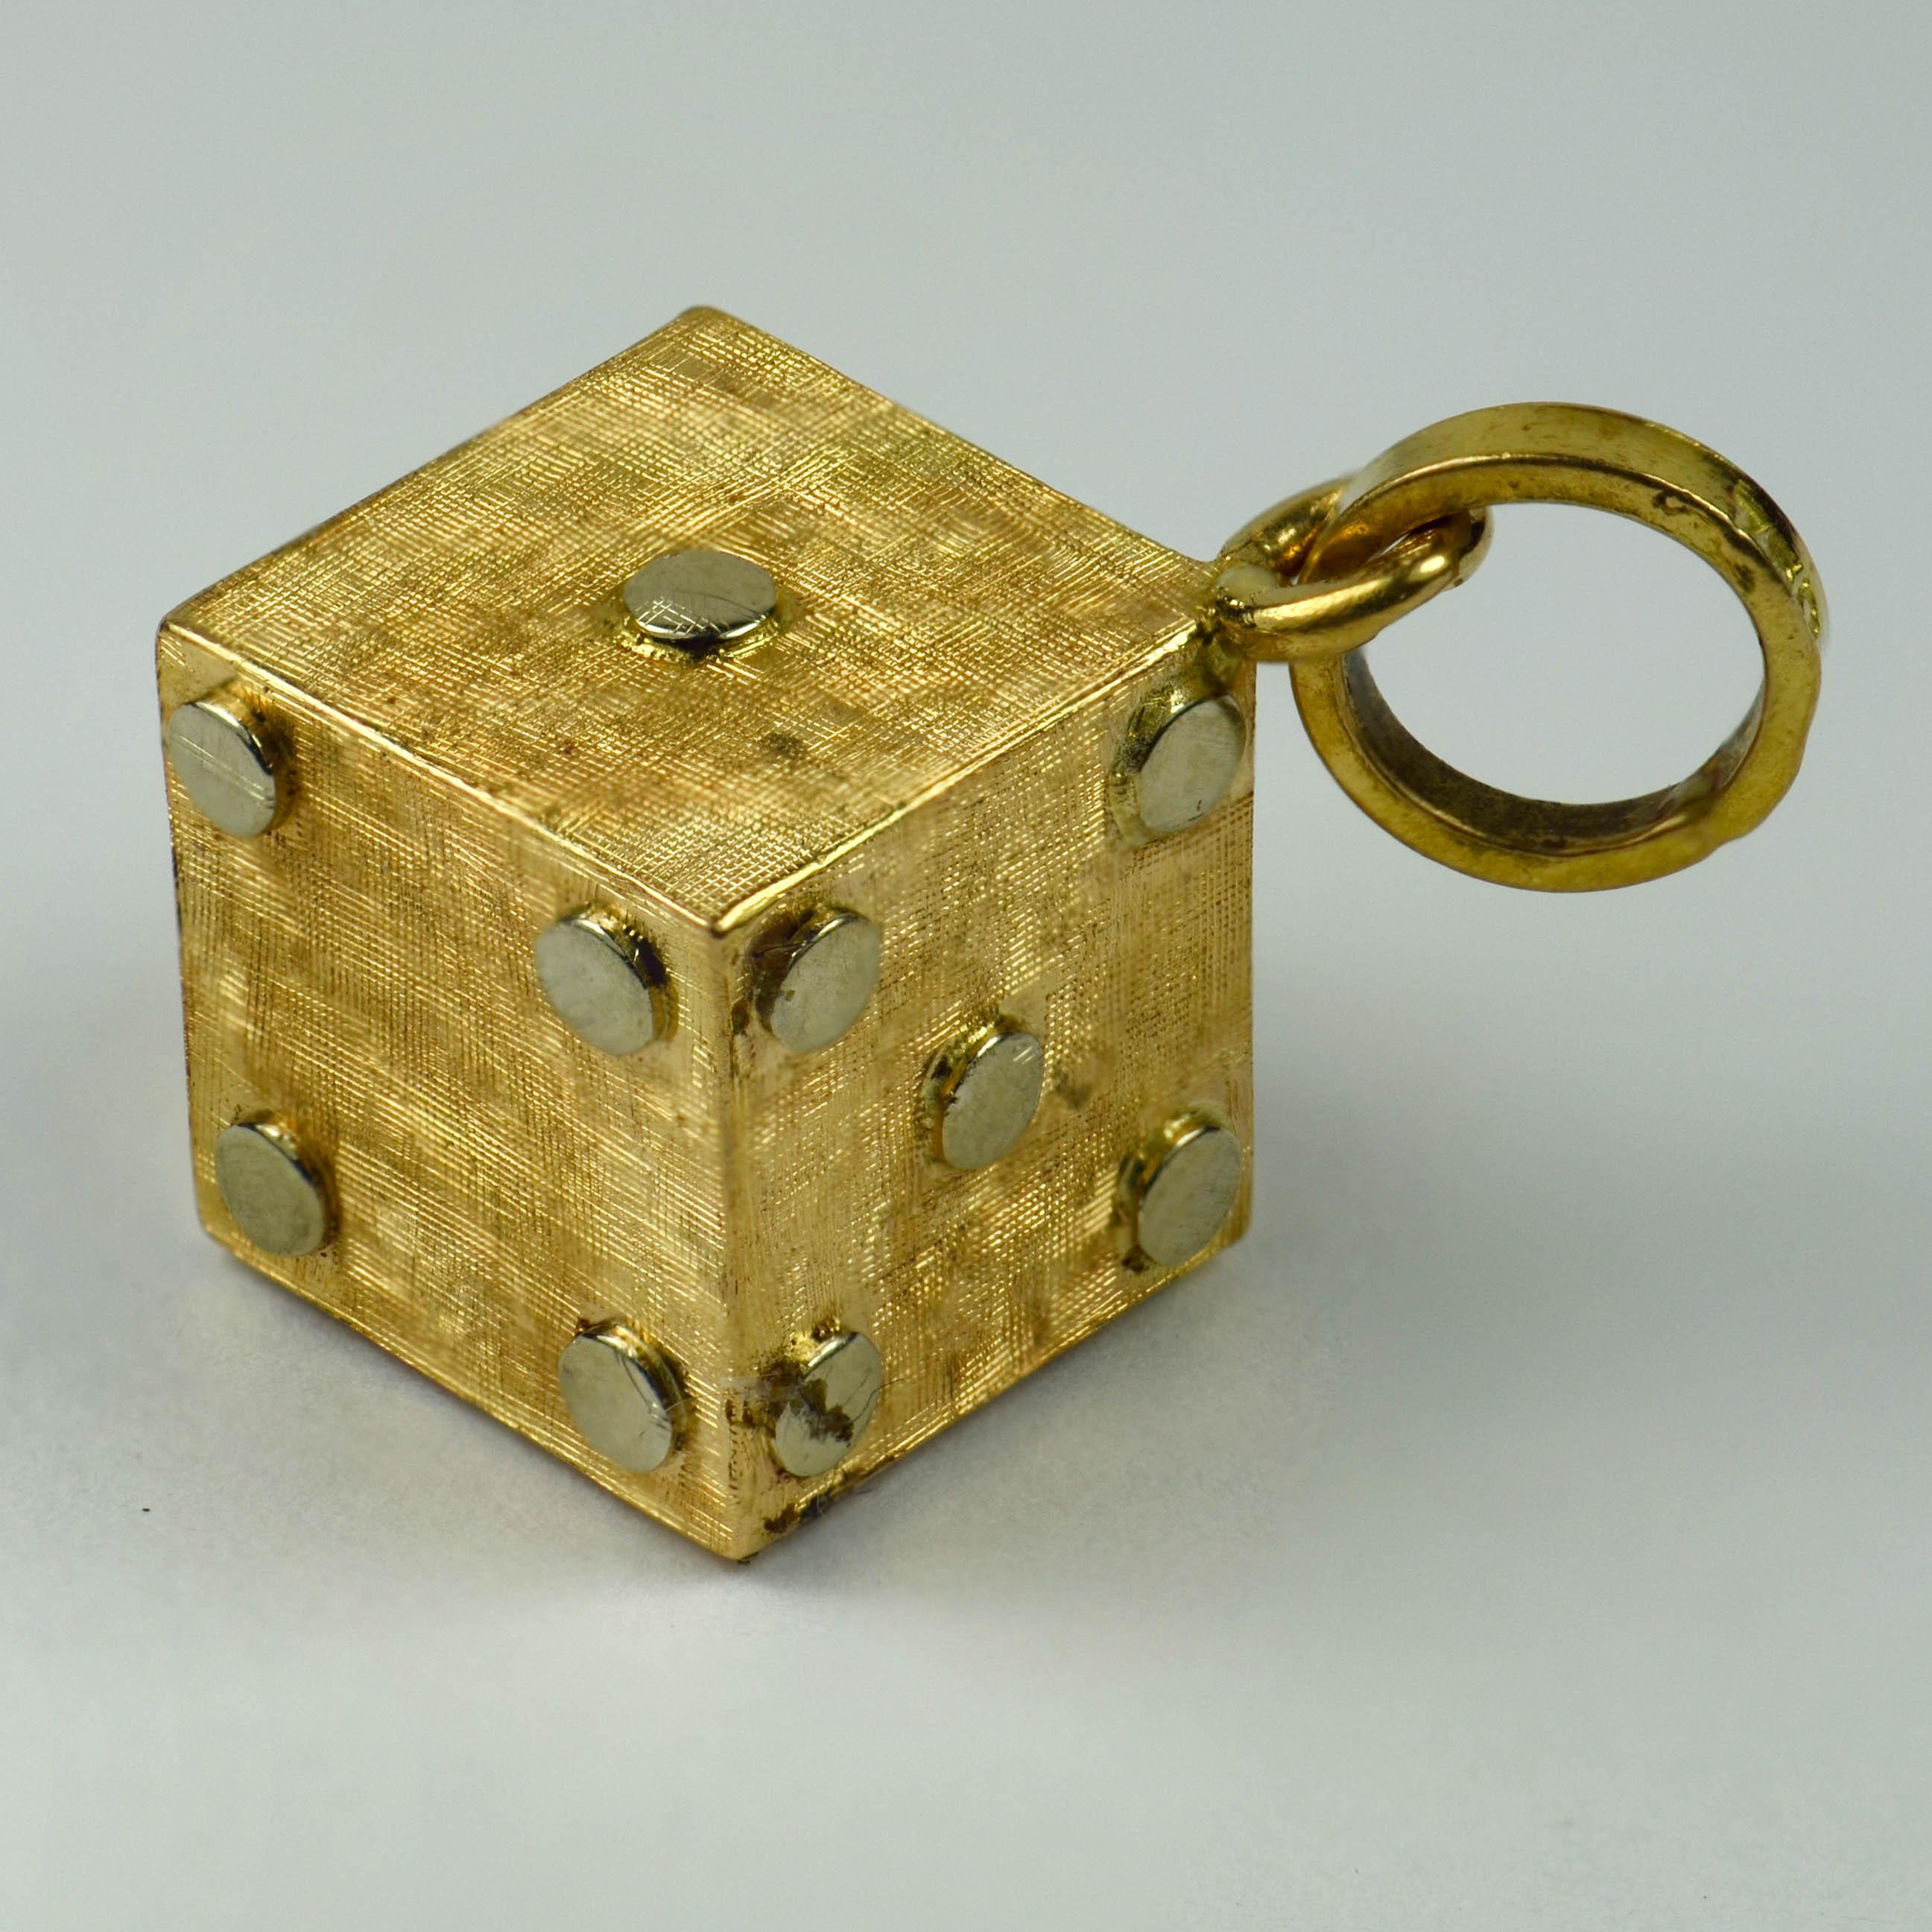 An 18 karat (18K) yellow and white gold charm pendant designed as a gambling dice cube or die with cross-hatched yellow gold faces and white gold pips. Stamped with an unknown makers mark SLA and the French import mark for 18 karat gold between